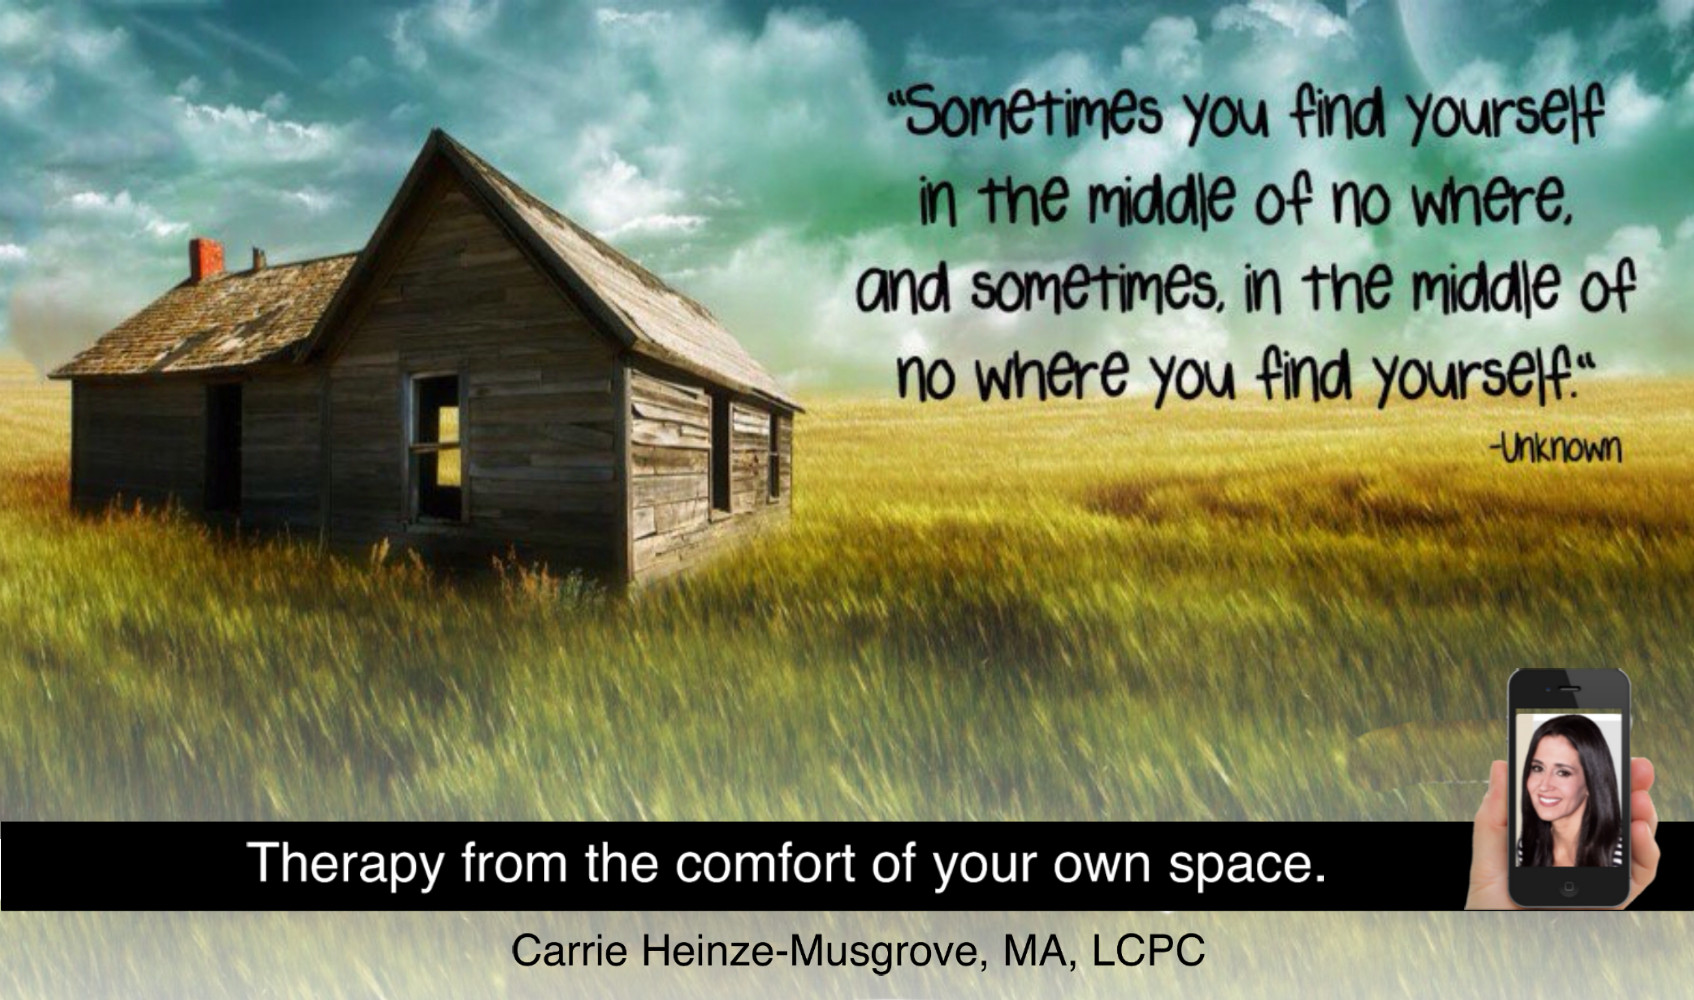 Finding yourself in the middle of nowhere?